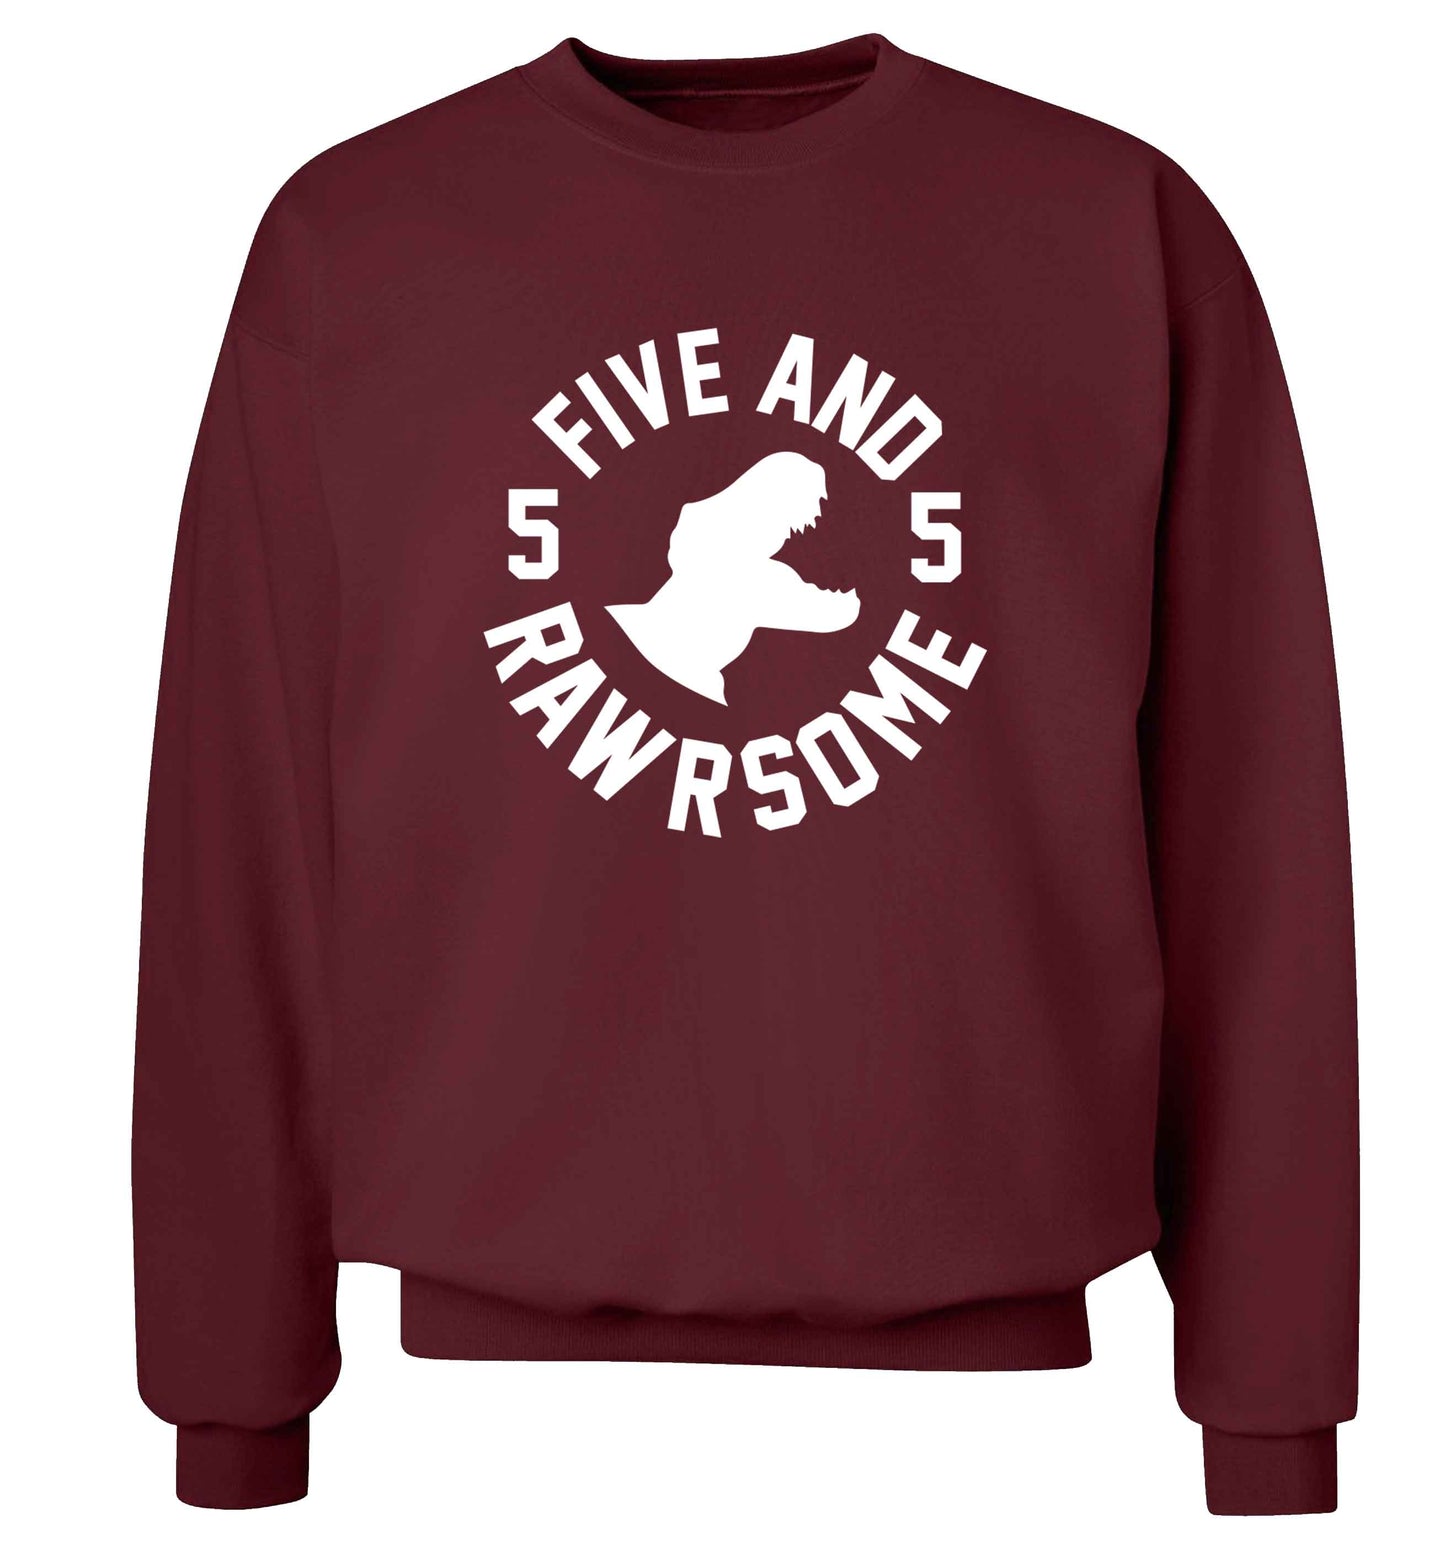 Five and rawrsome adult's unisex maroon sweater 2XL